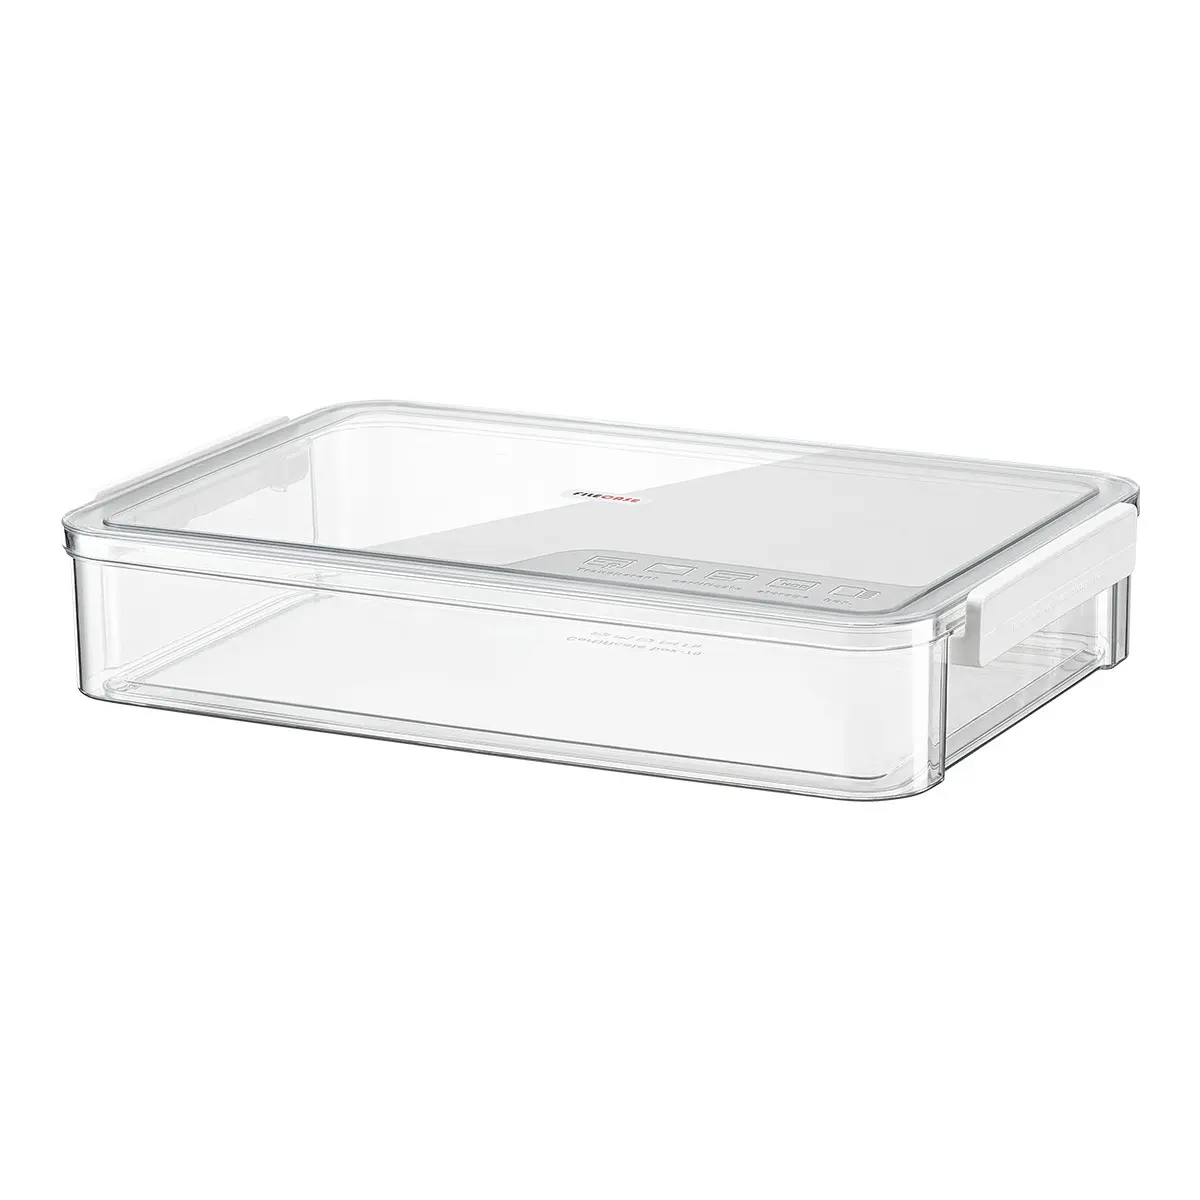 Large A4 Size PET Transparent Storage Box for Home Office Document Sorting Modern Design Rectangle Plastic Data Container